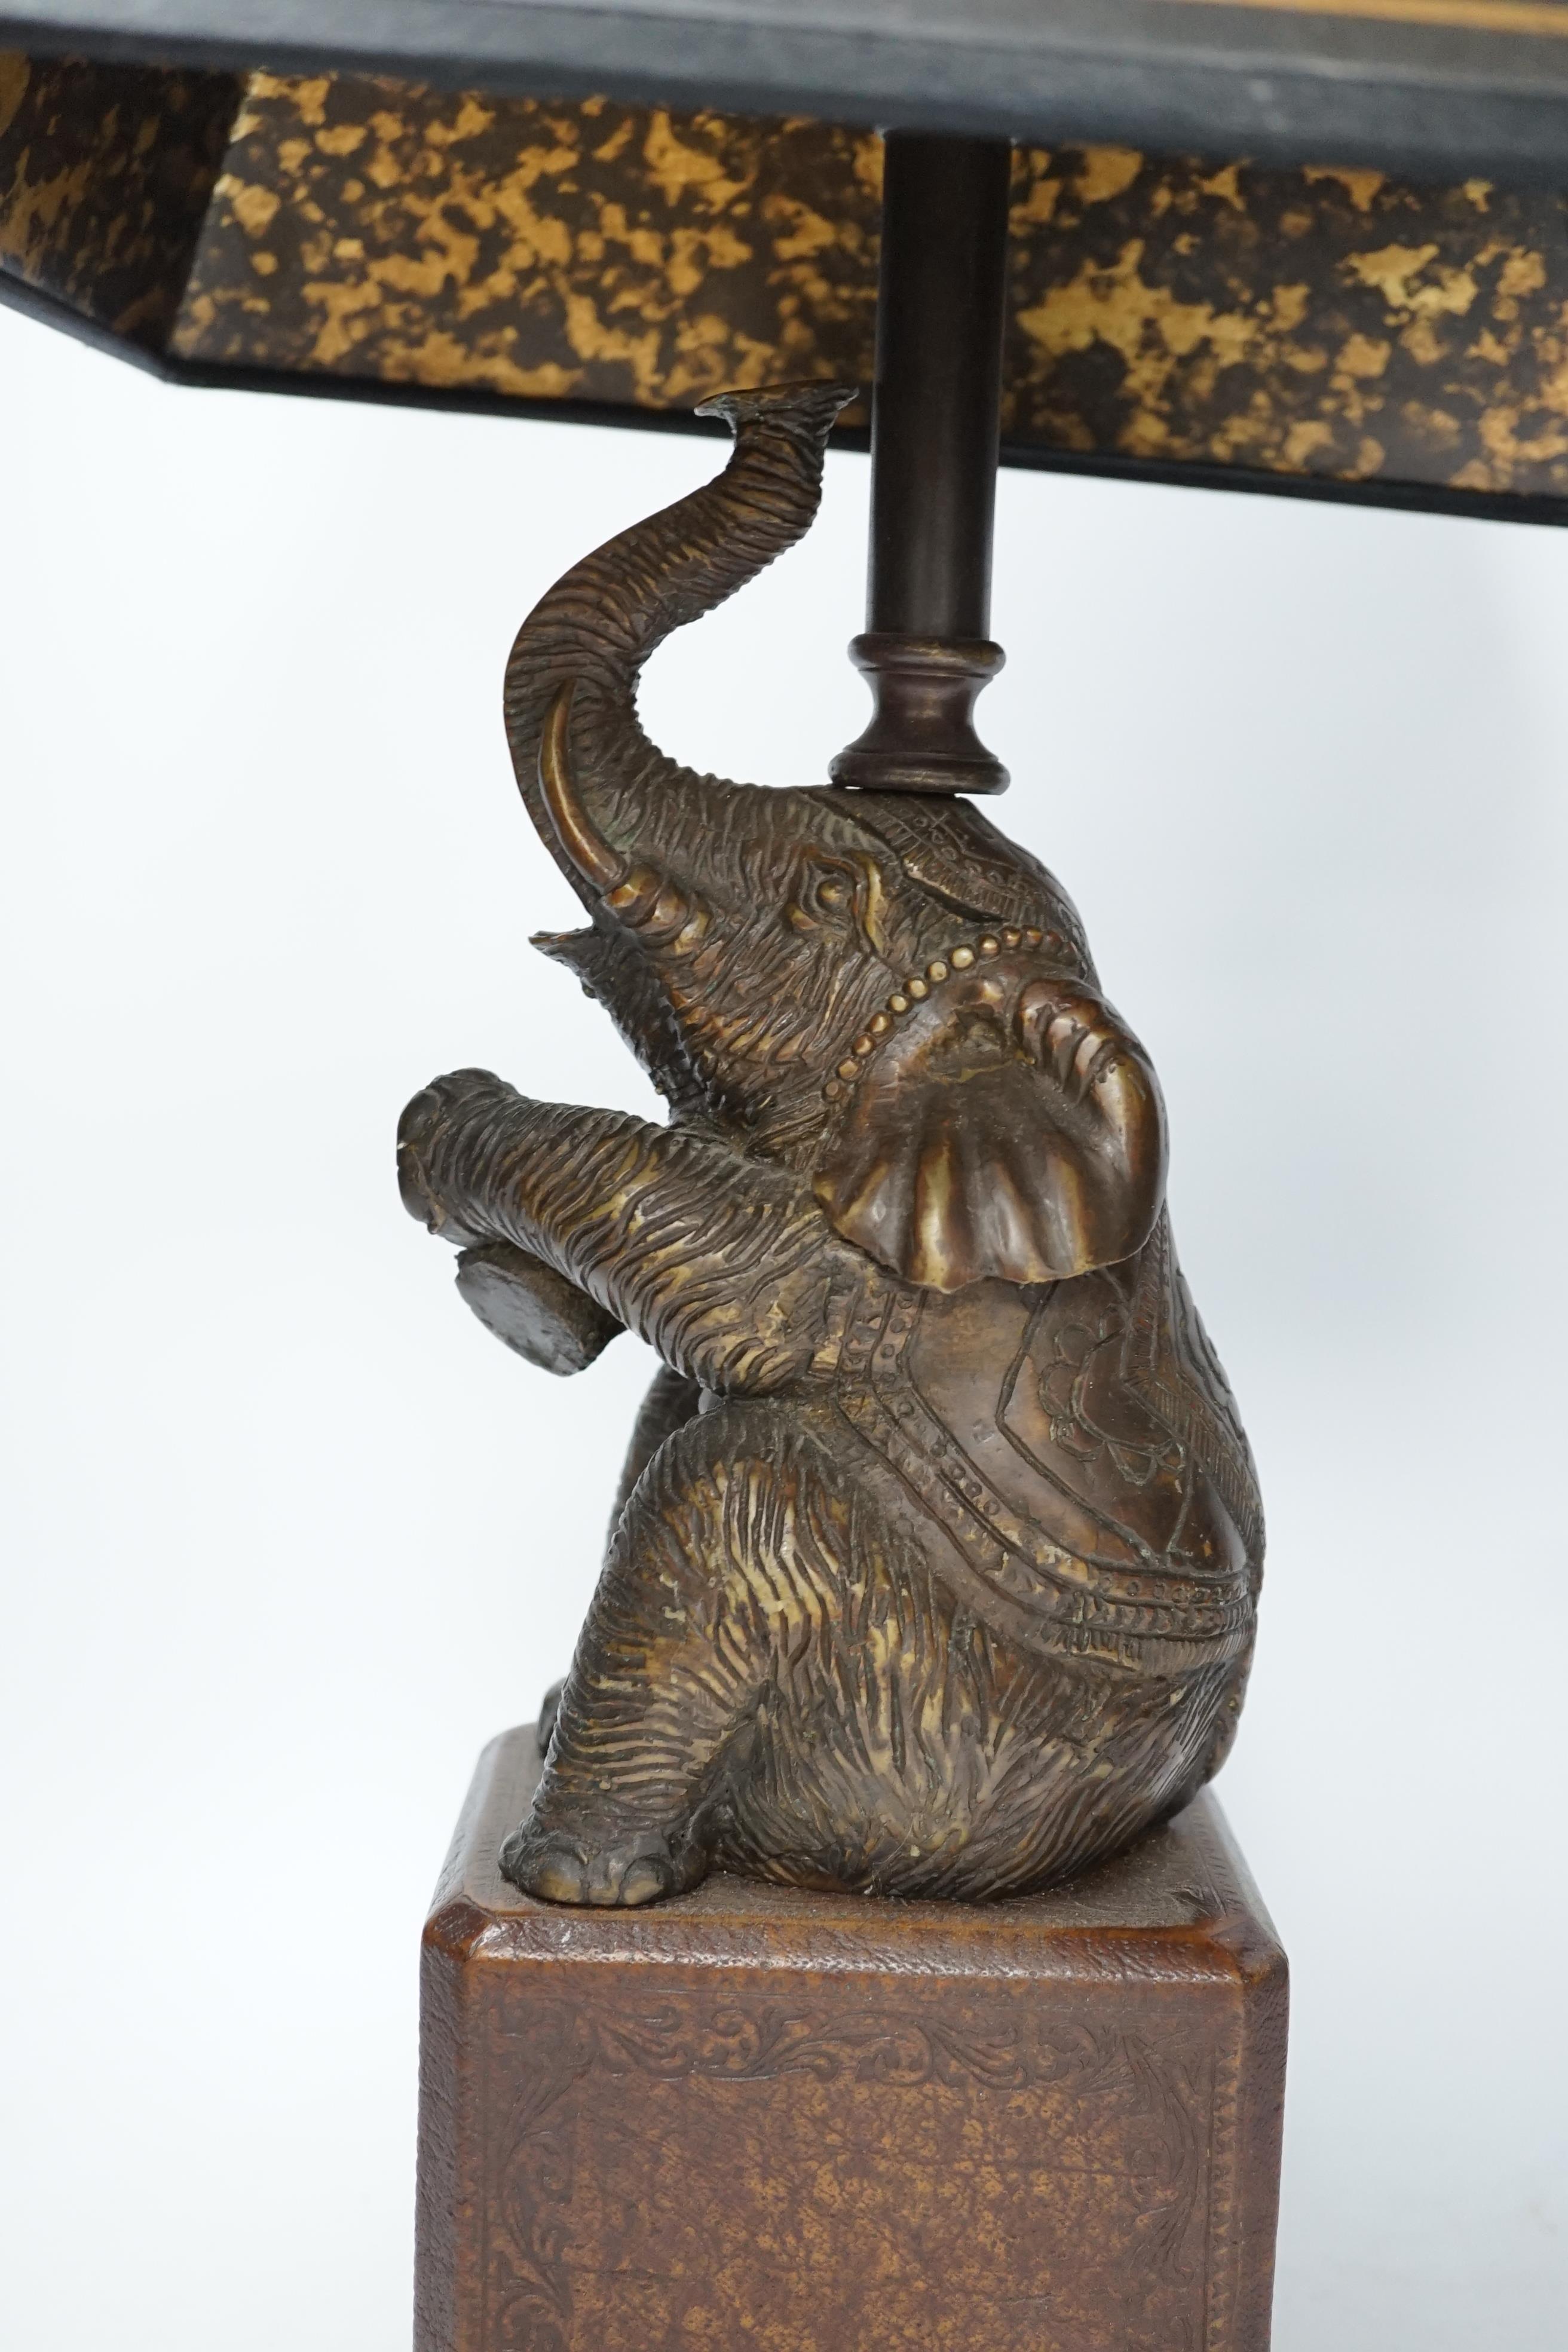 A bronzed elephant table lamp with chinoiserie shade, 65cm high